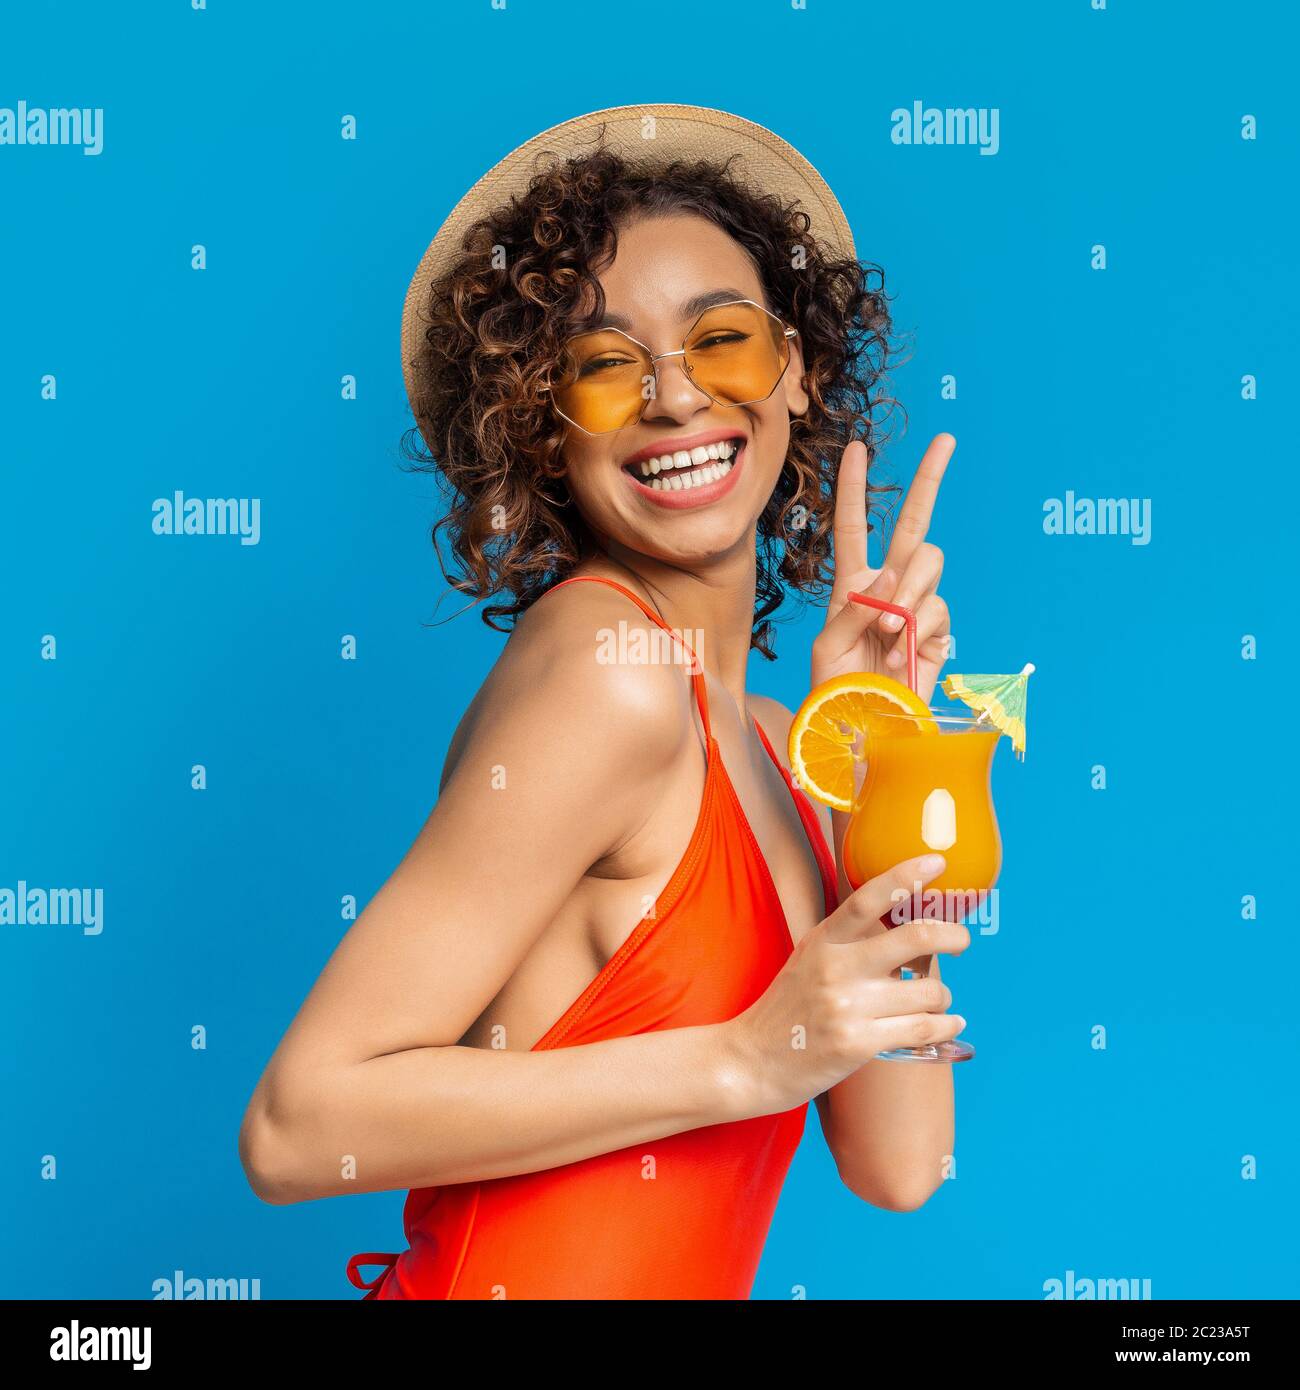 Joyful black girl in swimsuit enjoying summer cocktail and showing peace sign Stock Photo